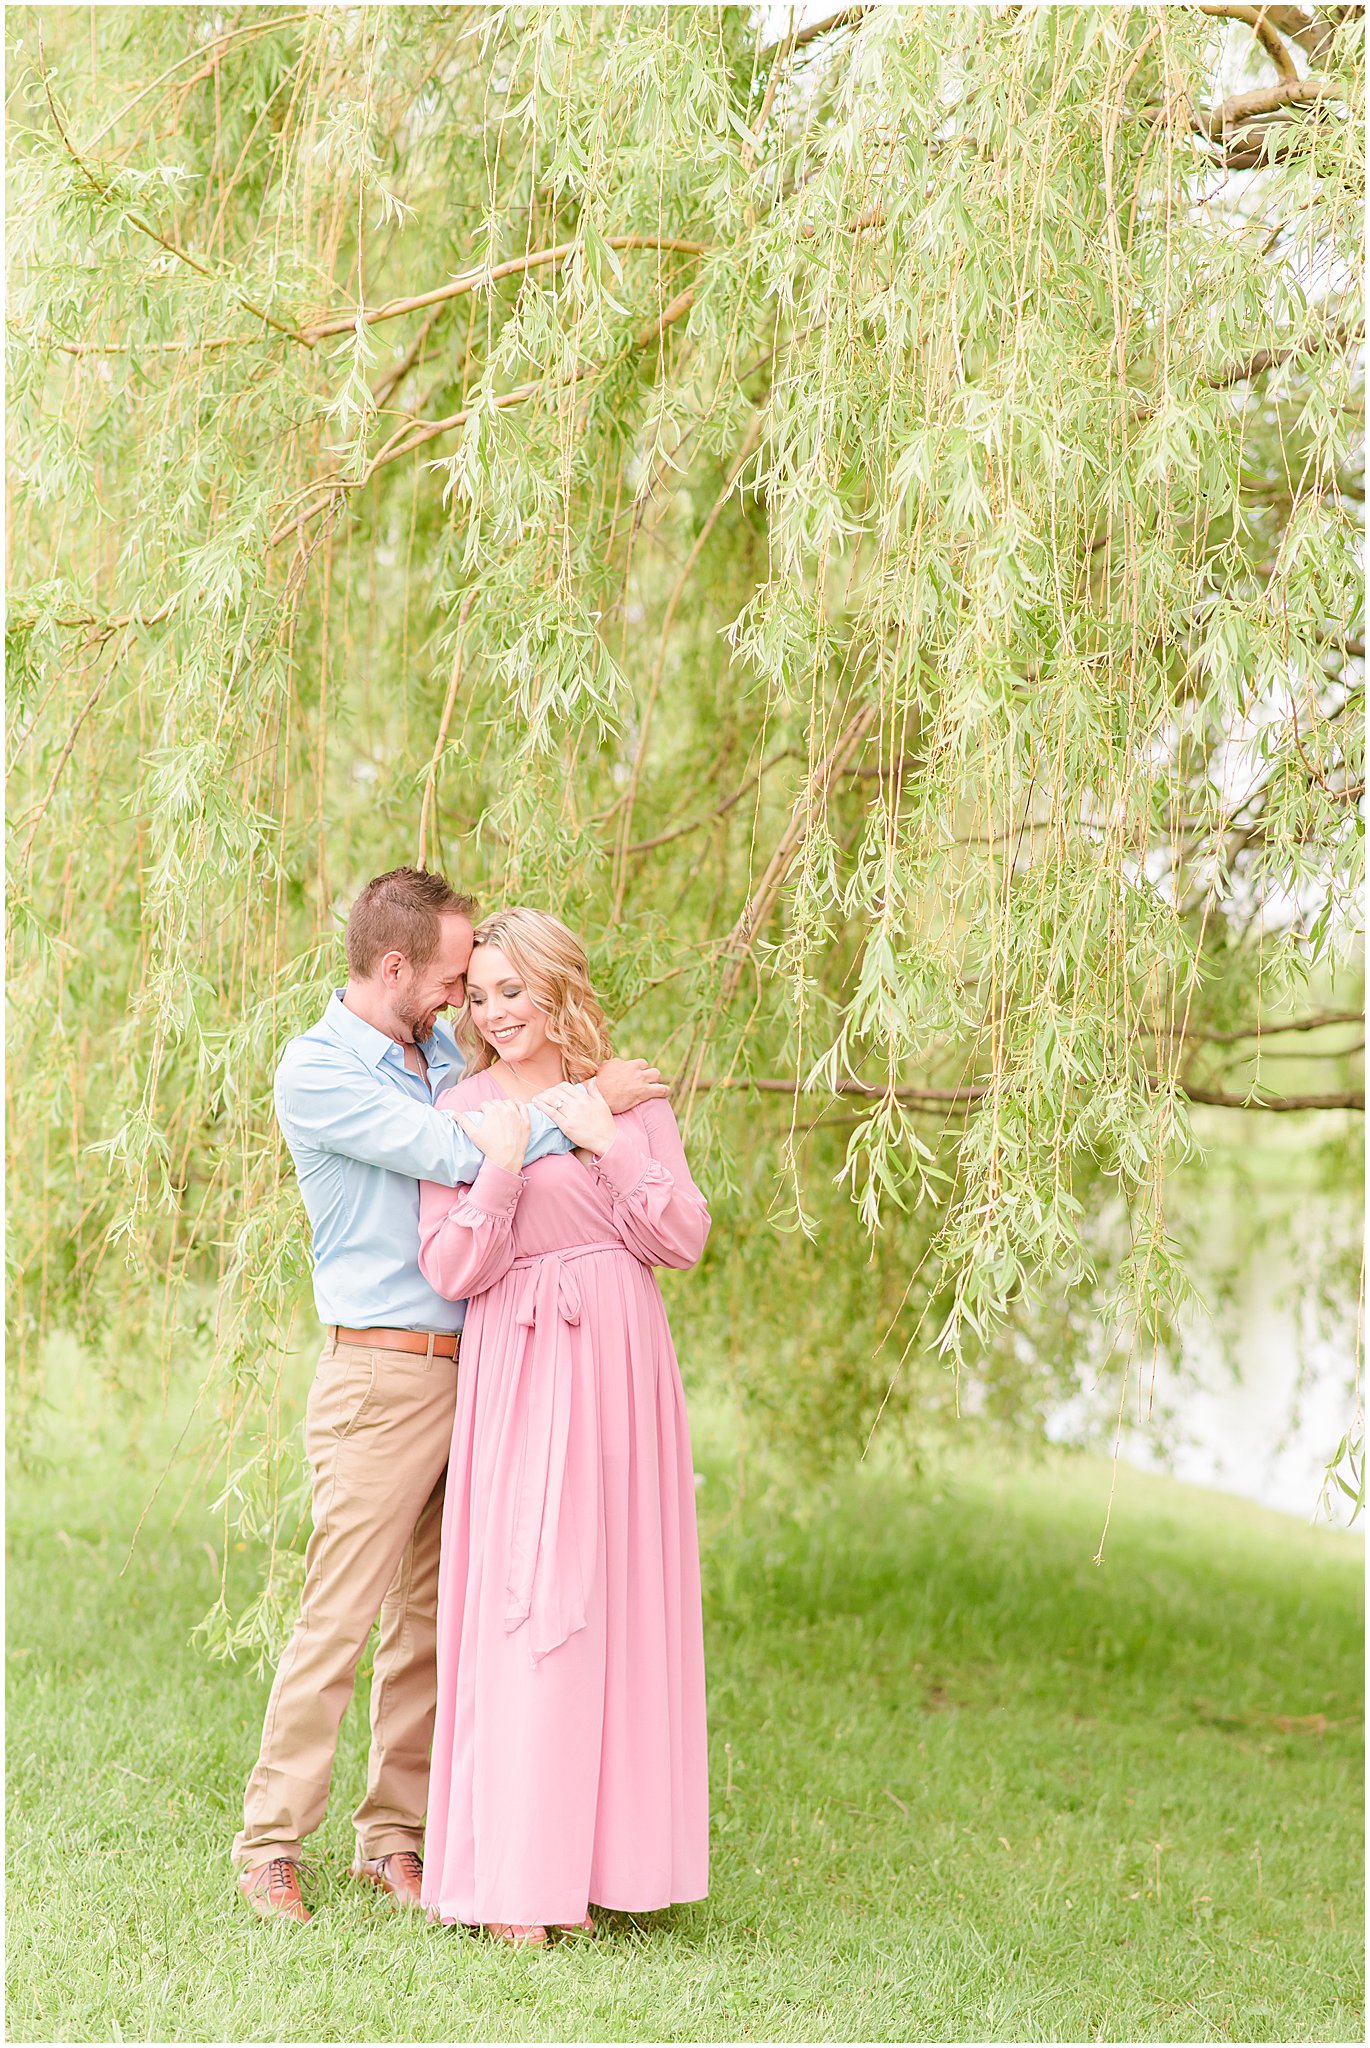 Couple nuzzling under willow tree during Coxhall Gardens engagement session